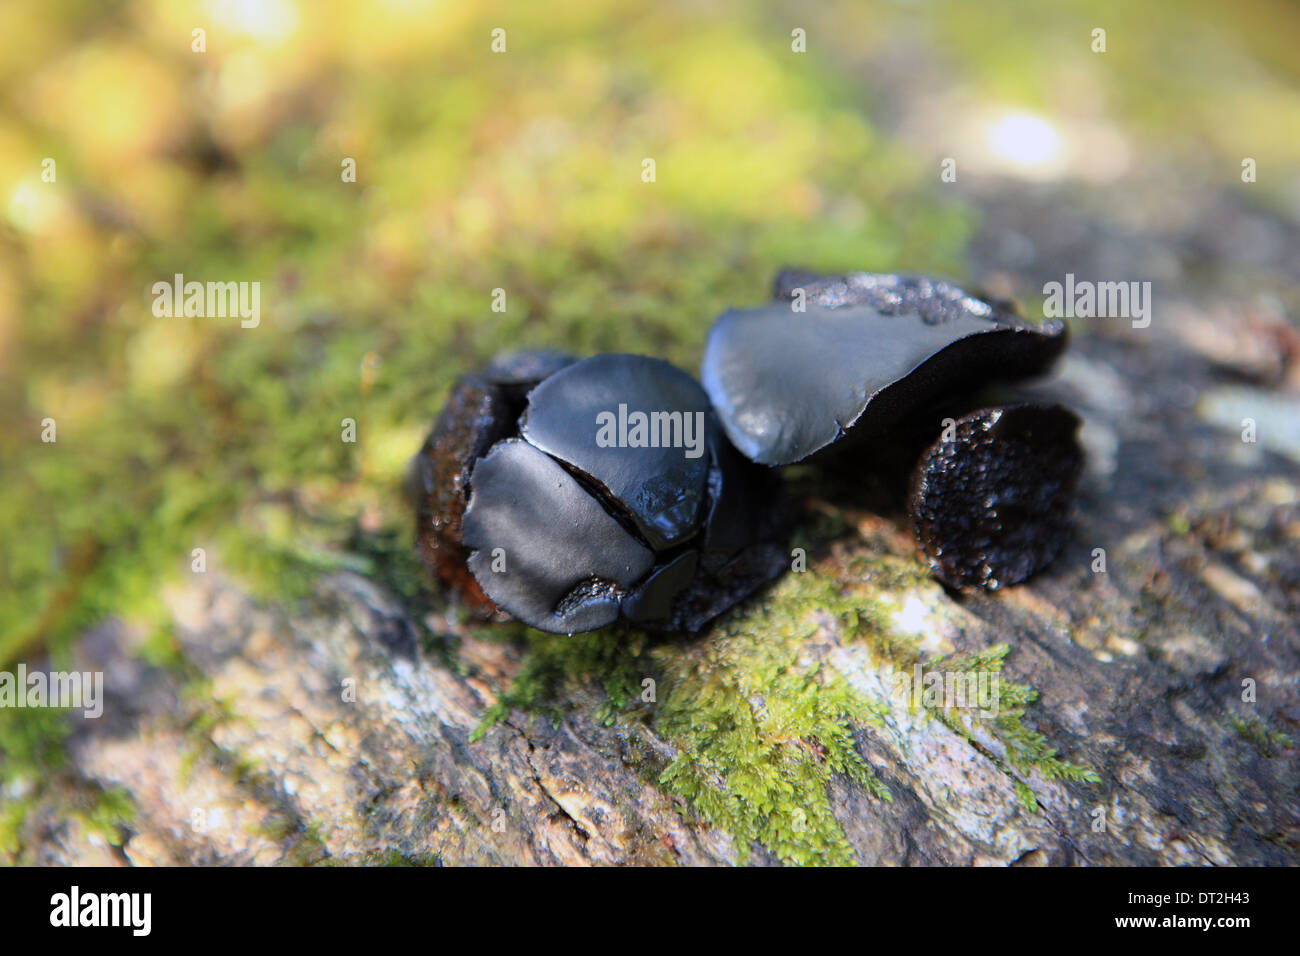 Bulgaria inquinans commonly known as Black Bulgar fungi but also referred to Batchelor's Buttons or Rubber Buttons Stock Photo